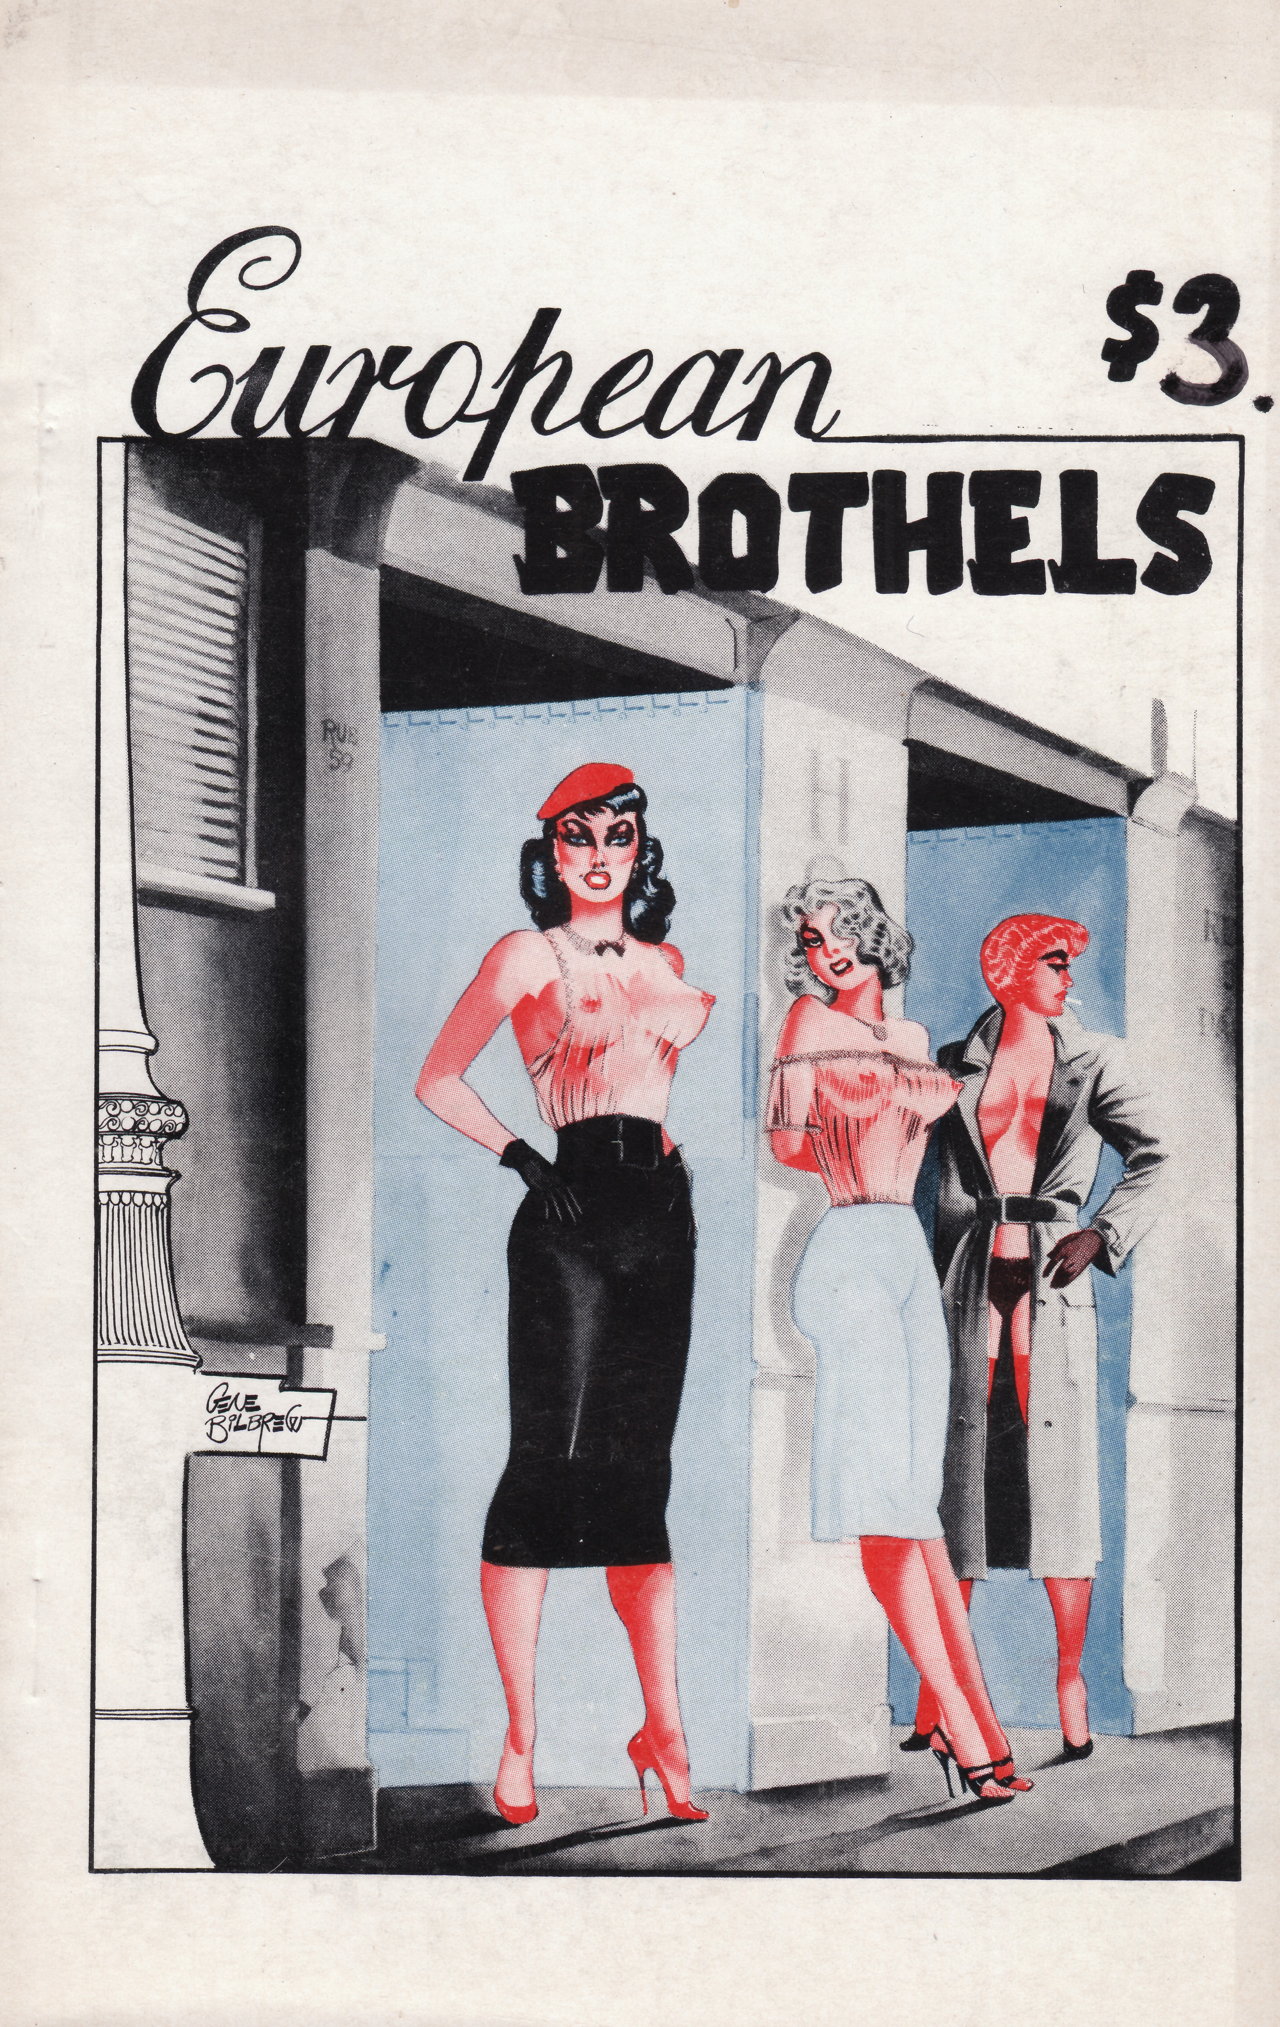 European Brothels book cover: three women in revealing clothing